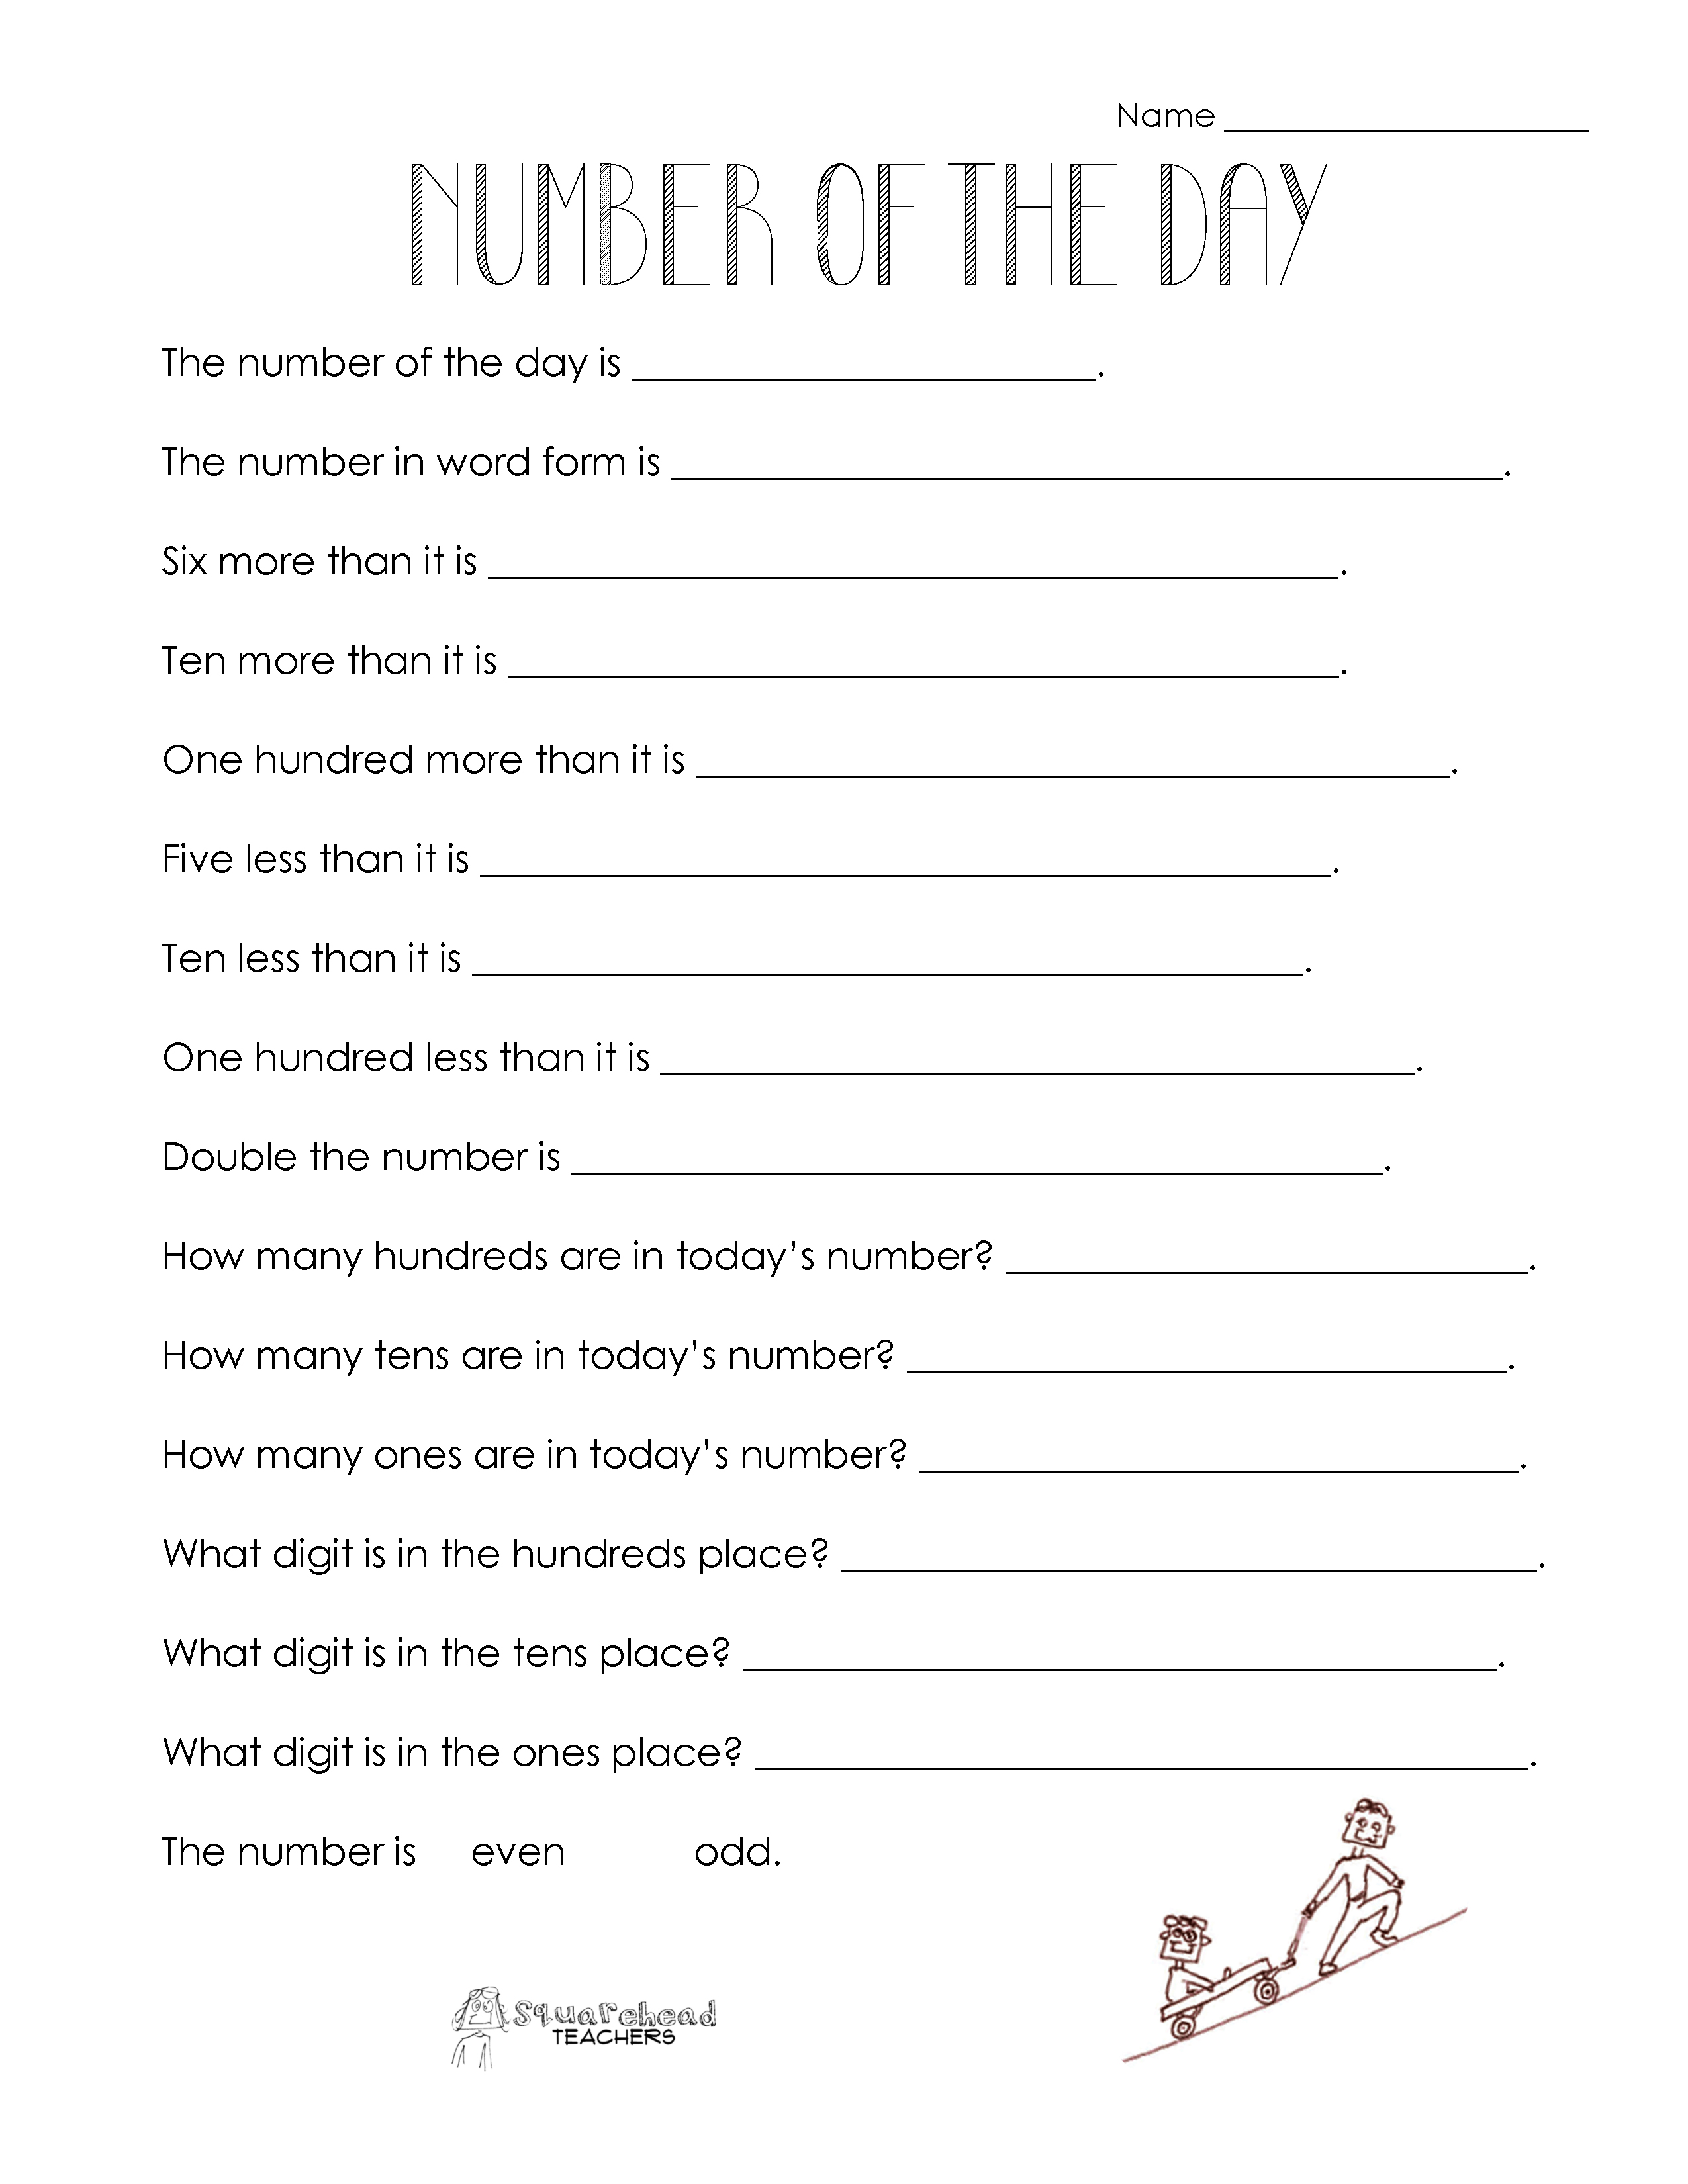 Day of the Number Worksheet 4th Grade